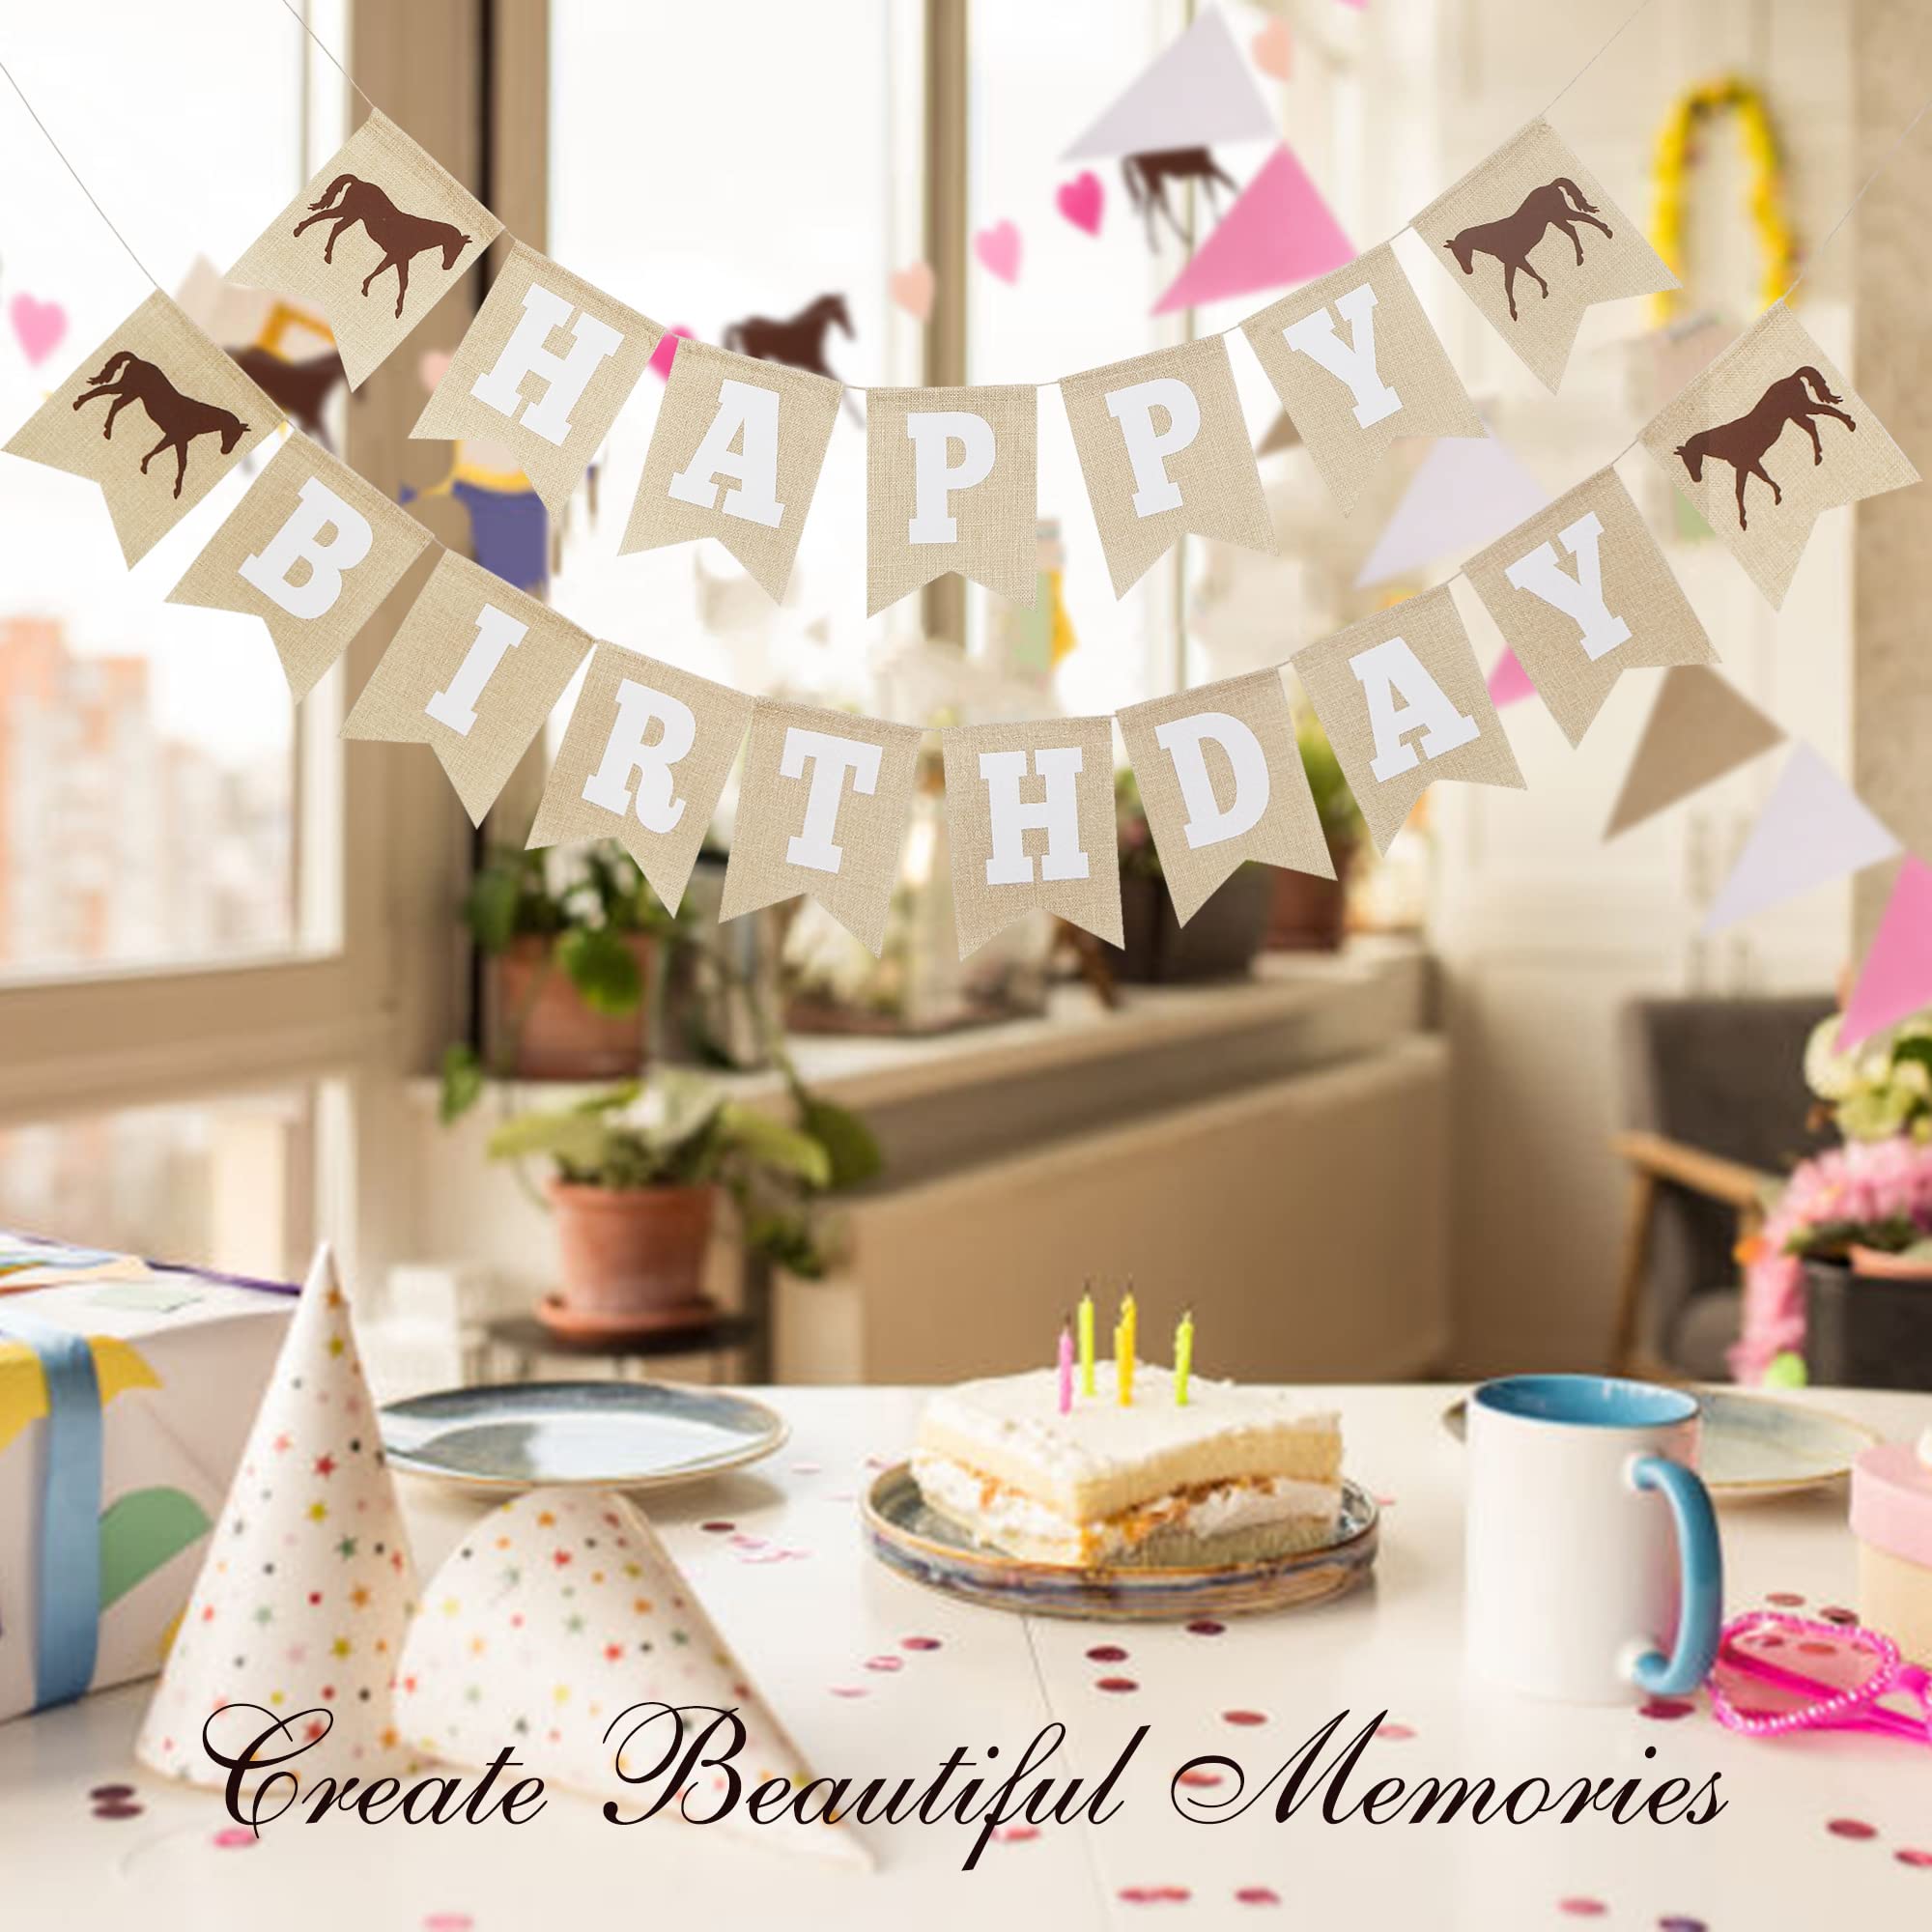 Horse Birthday Decorations – Happy Birthday Burlap Banner – Felt Horse Garland and Pennant Banner – Horse Party Supplies